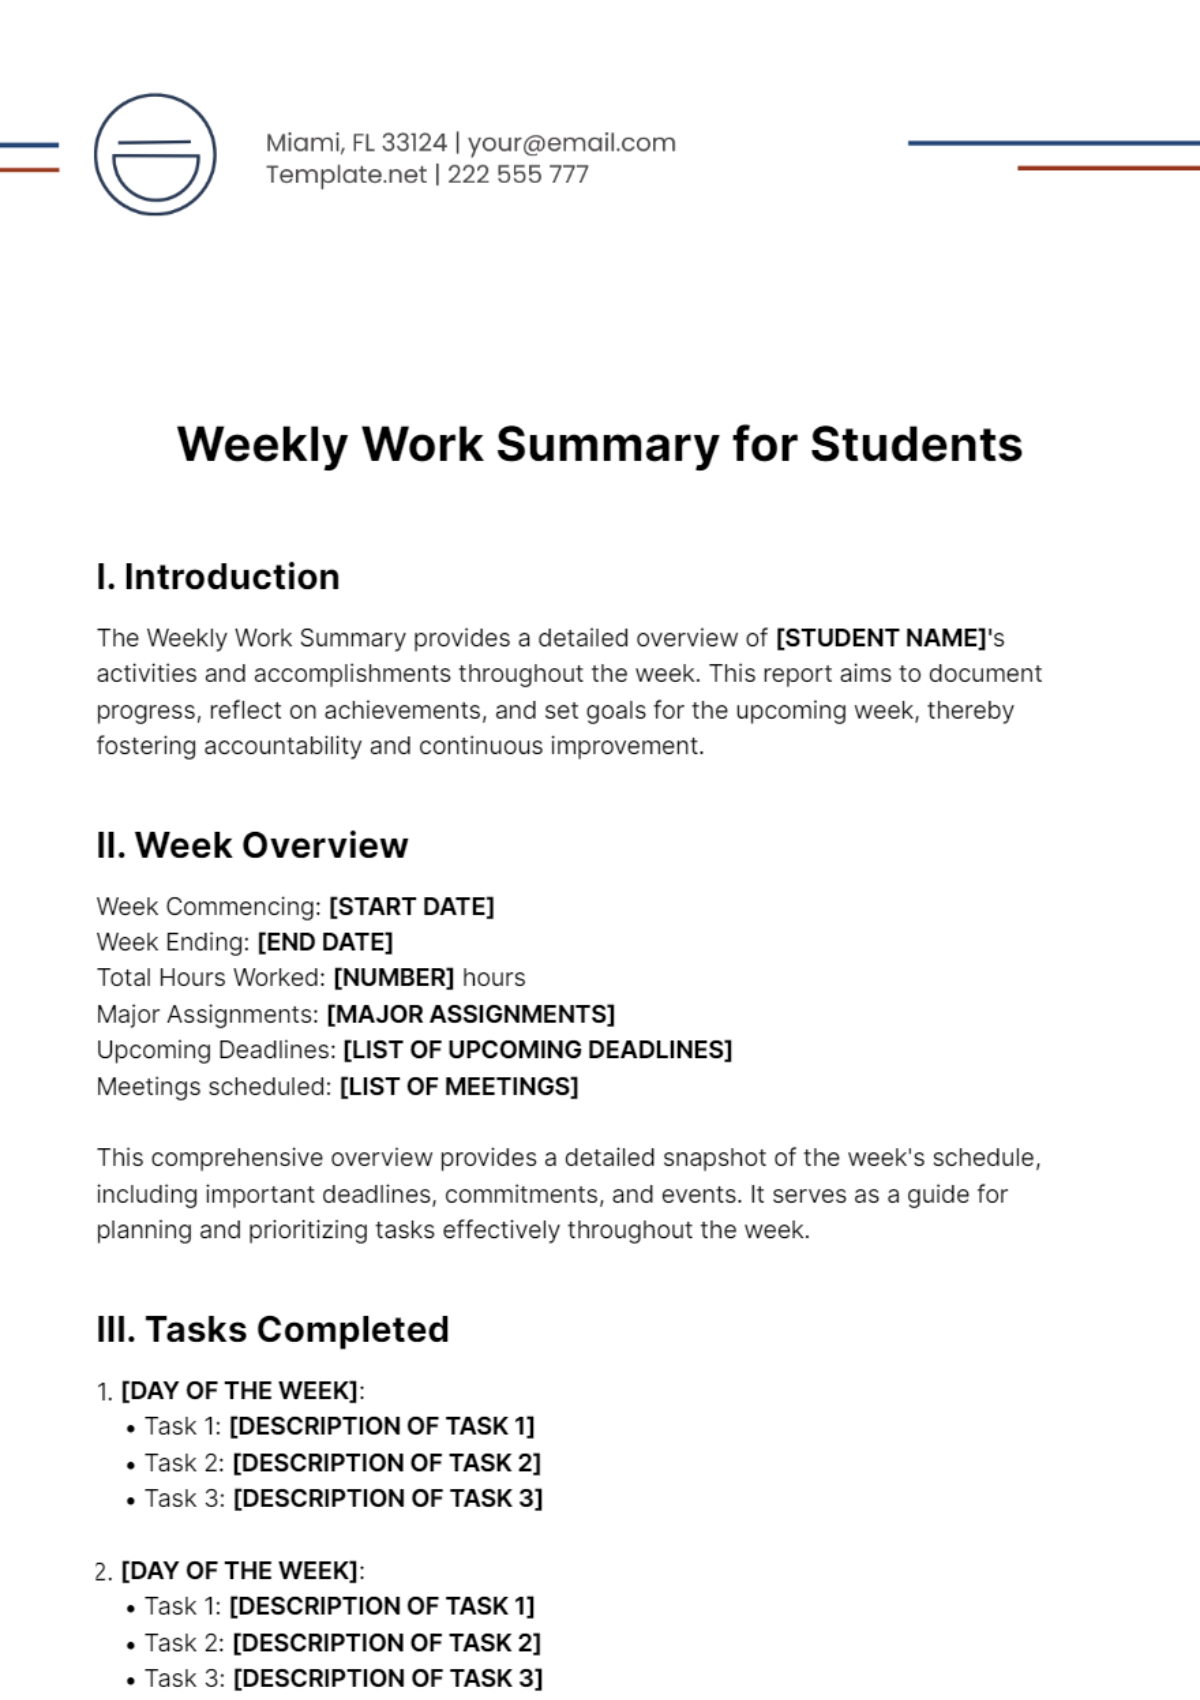 Weekly Work Summary for Students Template